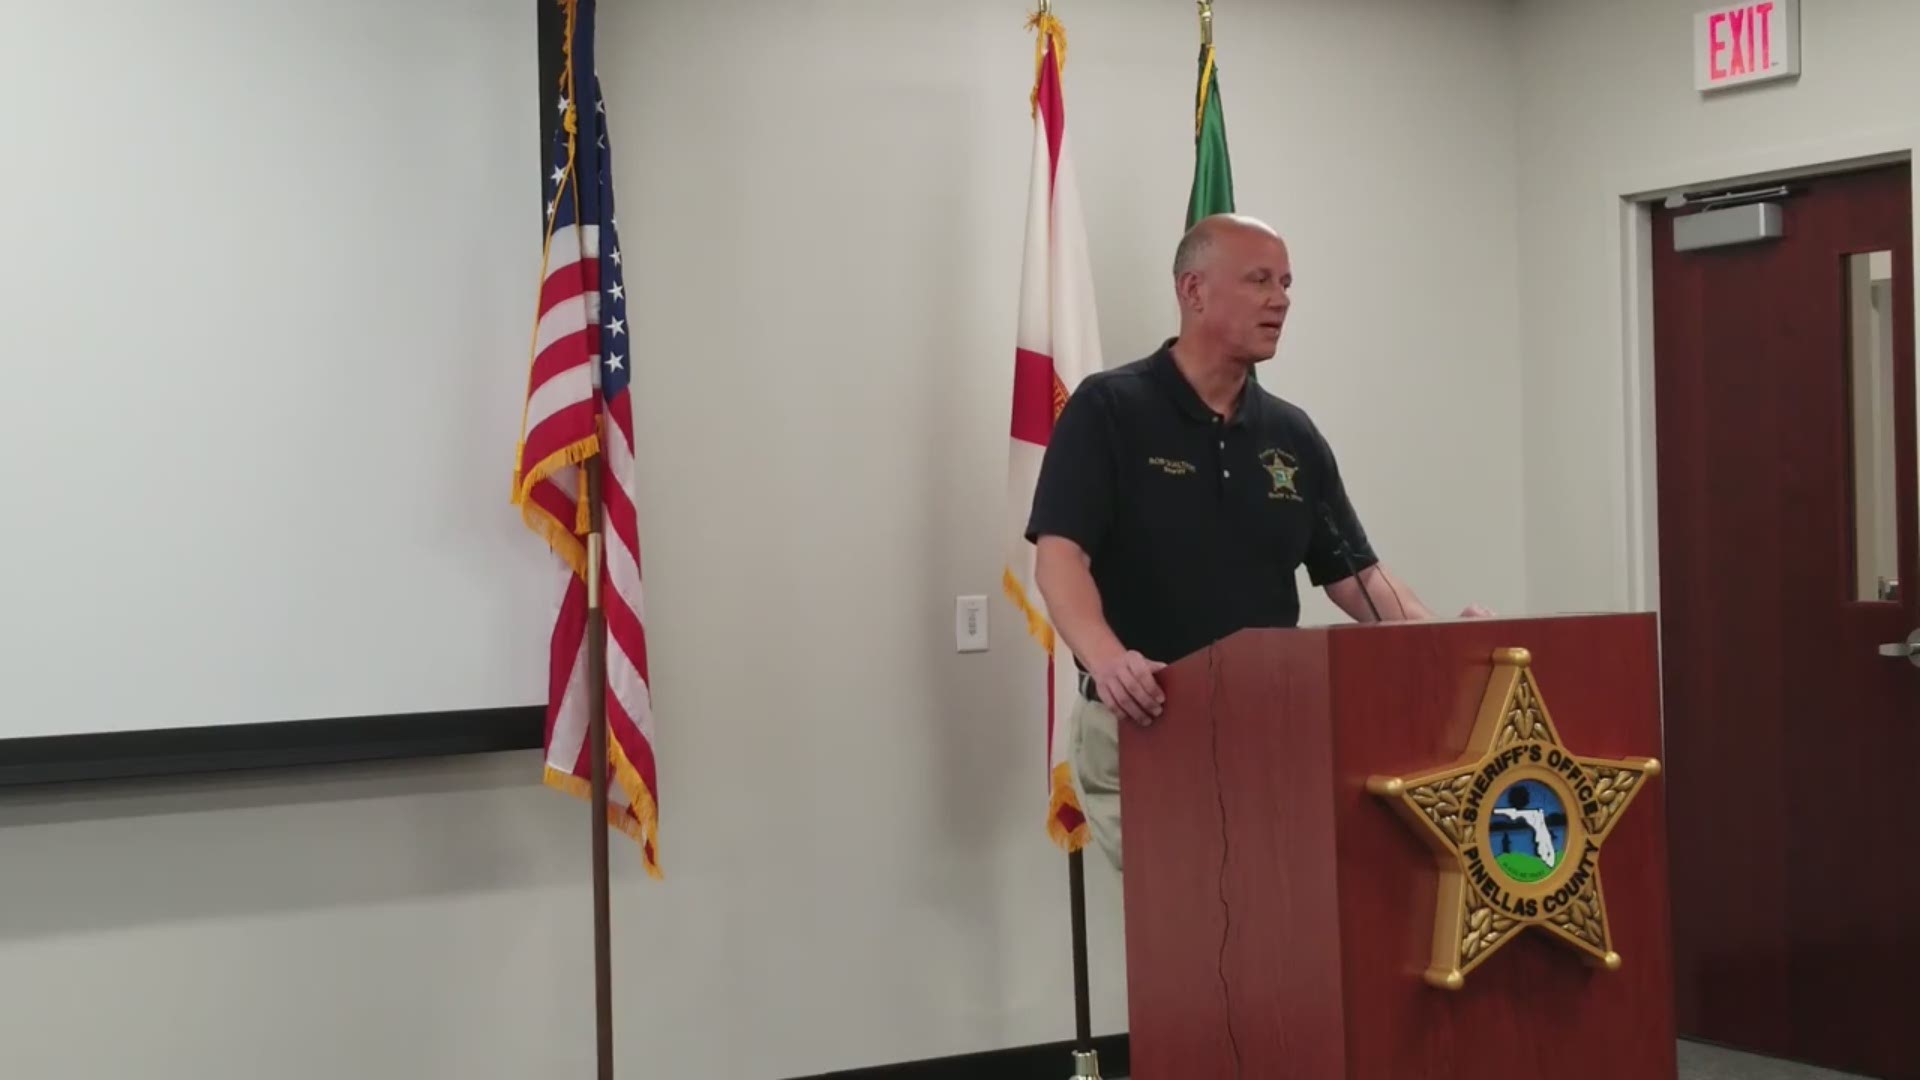 Sheriff Gualtieri outlined the subjective standard set by the Florida Legislature that precluded the Sheriff's Office from making an arrest by Florida State Statute under the "Stand Your Ground."